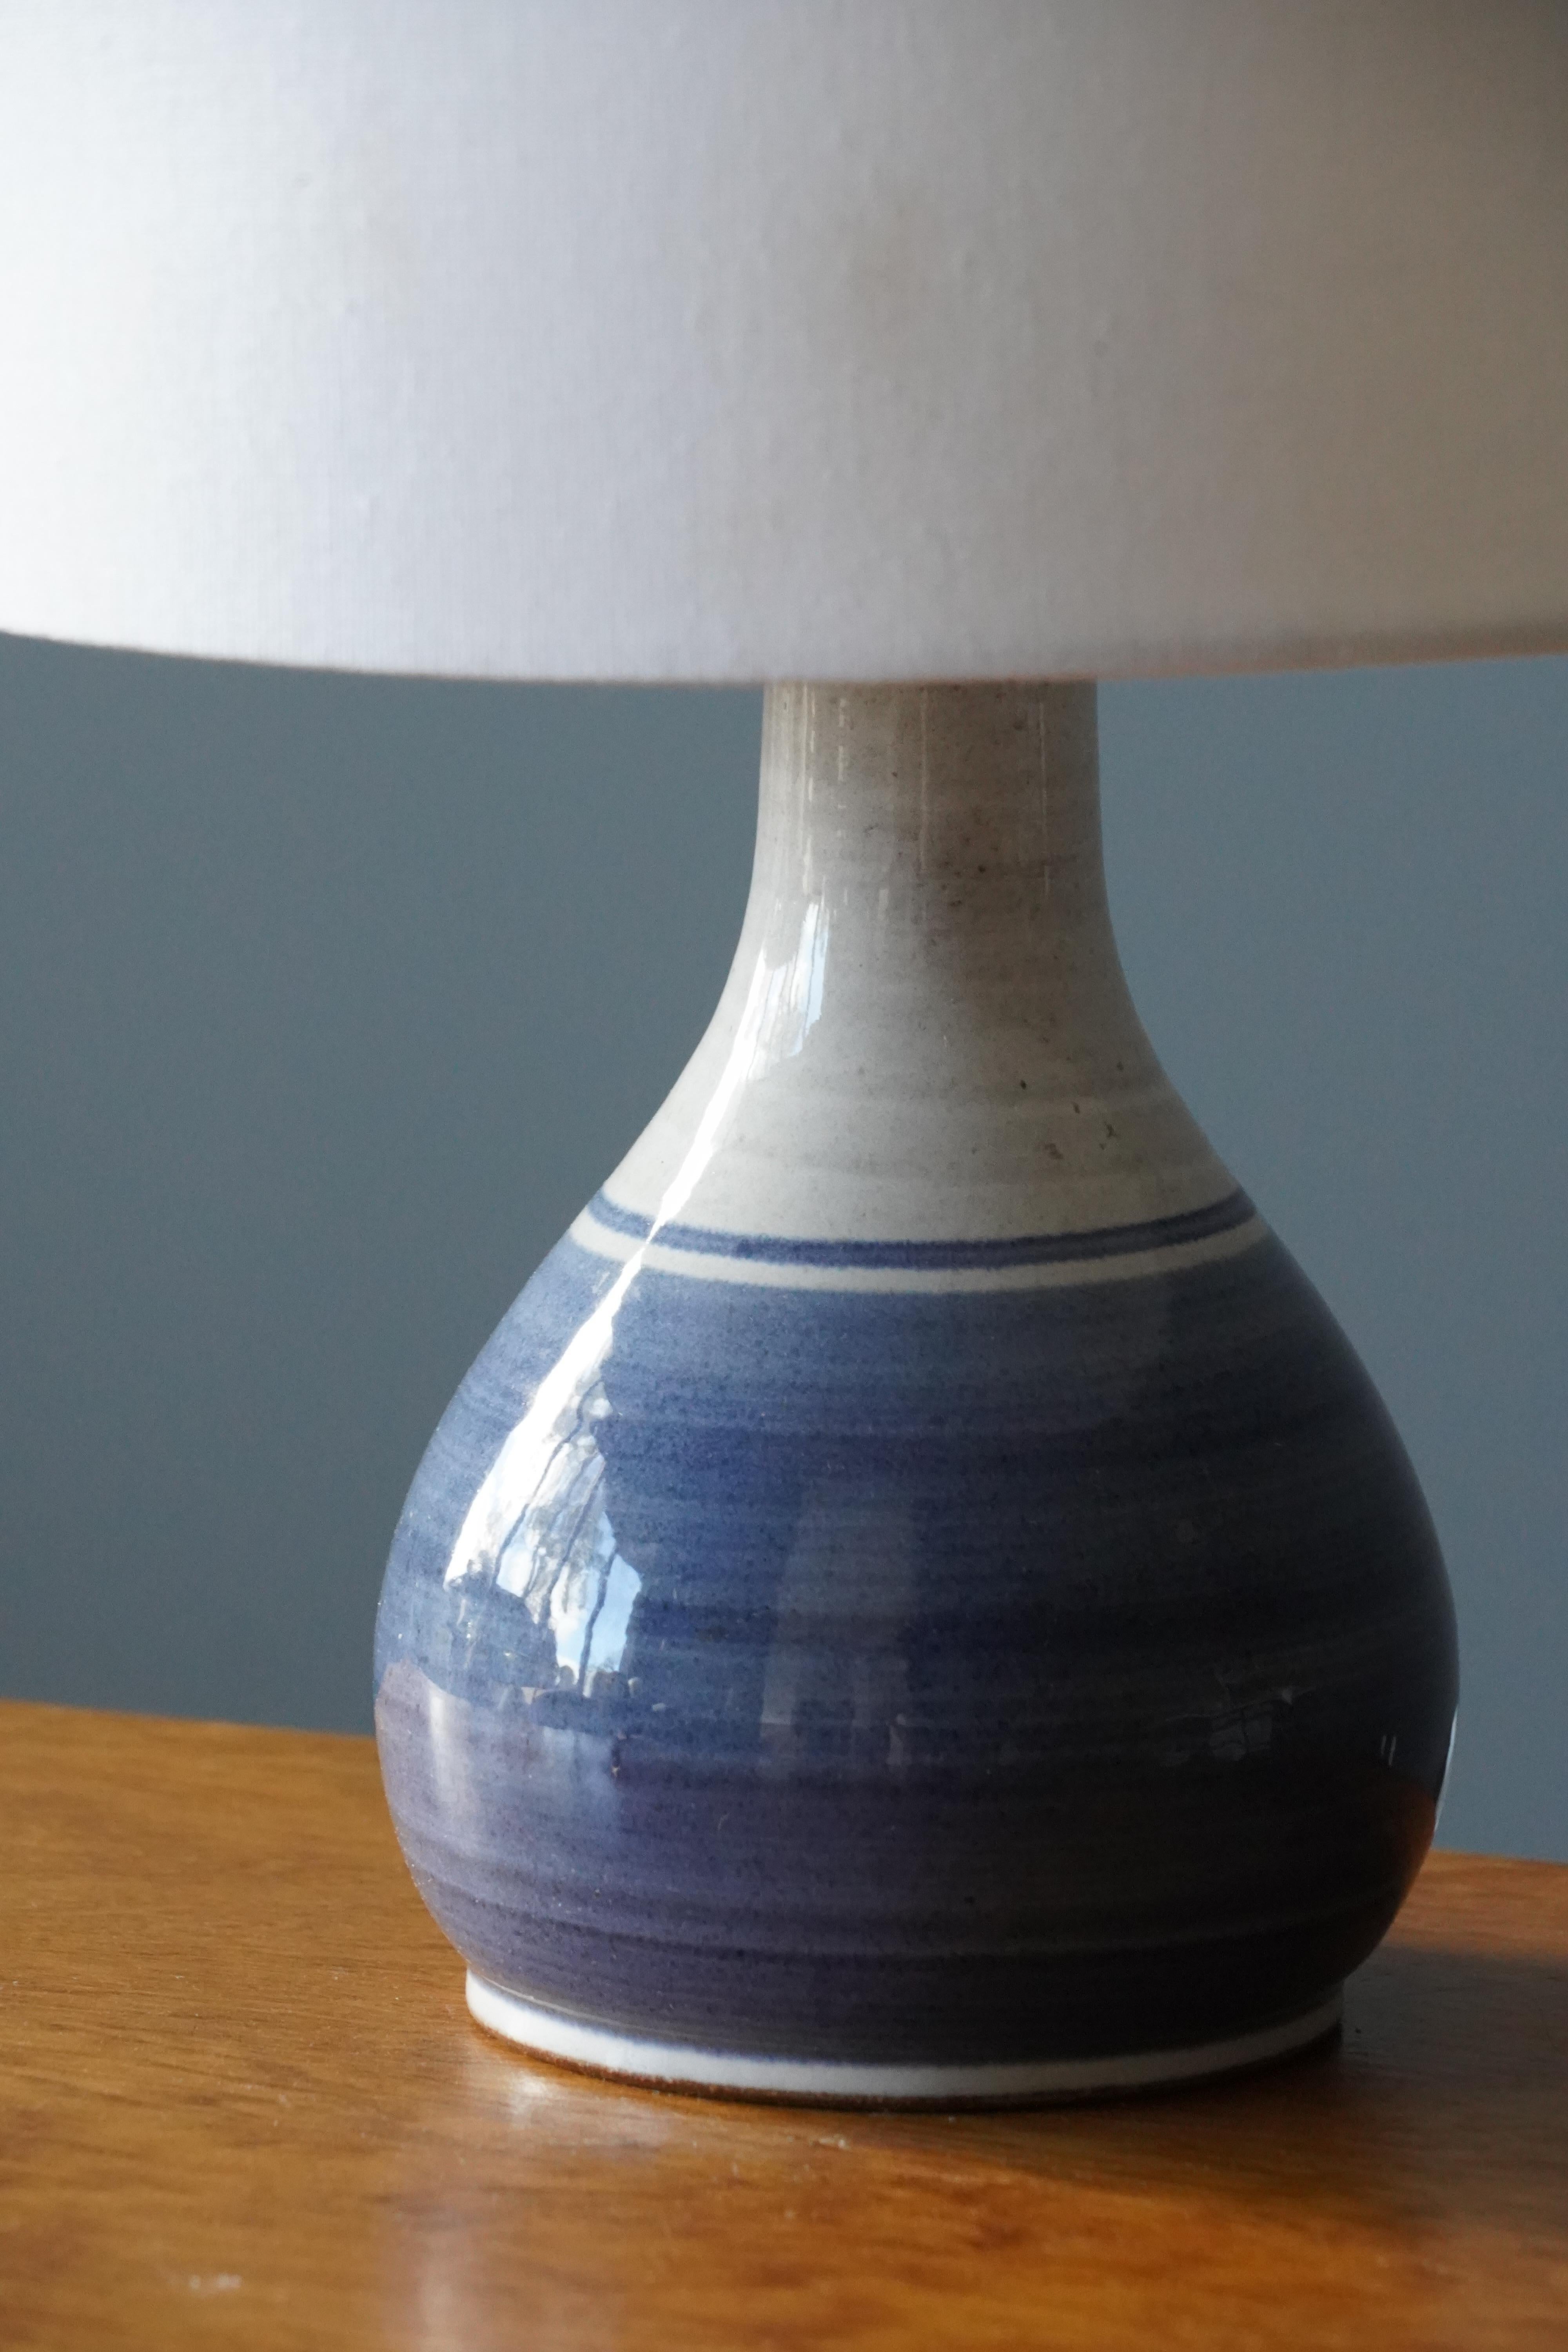 A table lamp, designed and produced by Bofa, Denmark, c. 1960s. Features blue and white glazed stoneware.

Dimensions listed are without shade. 
Dimensions with shade: height is 14 inches, width is 10 inches.
Dimensions of shade: top diameter is